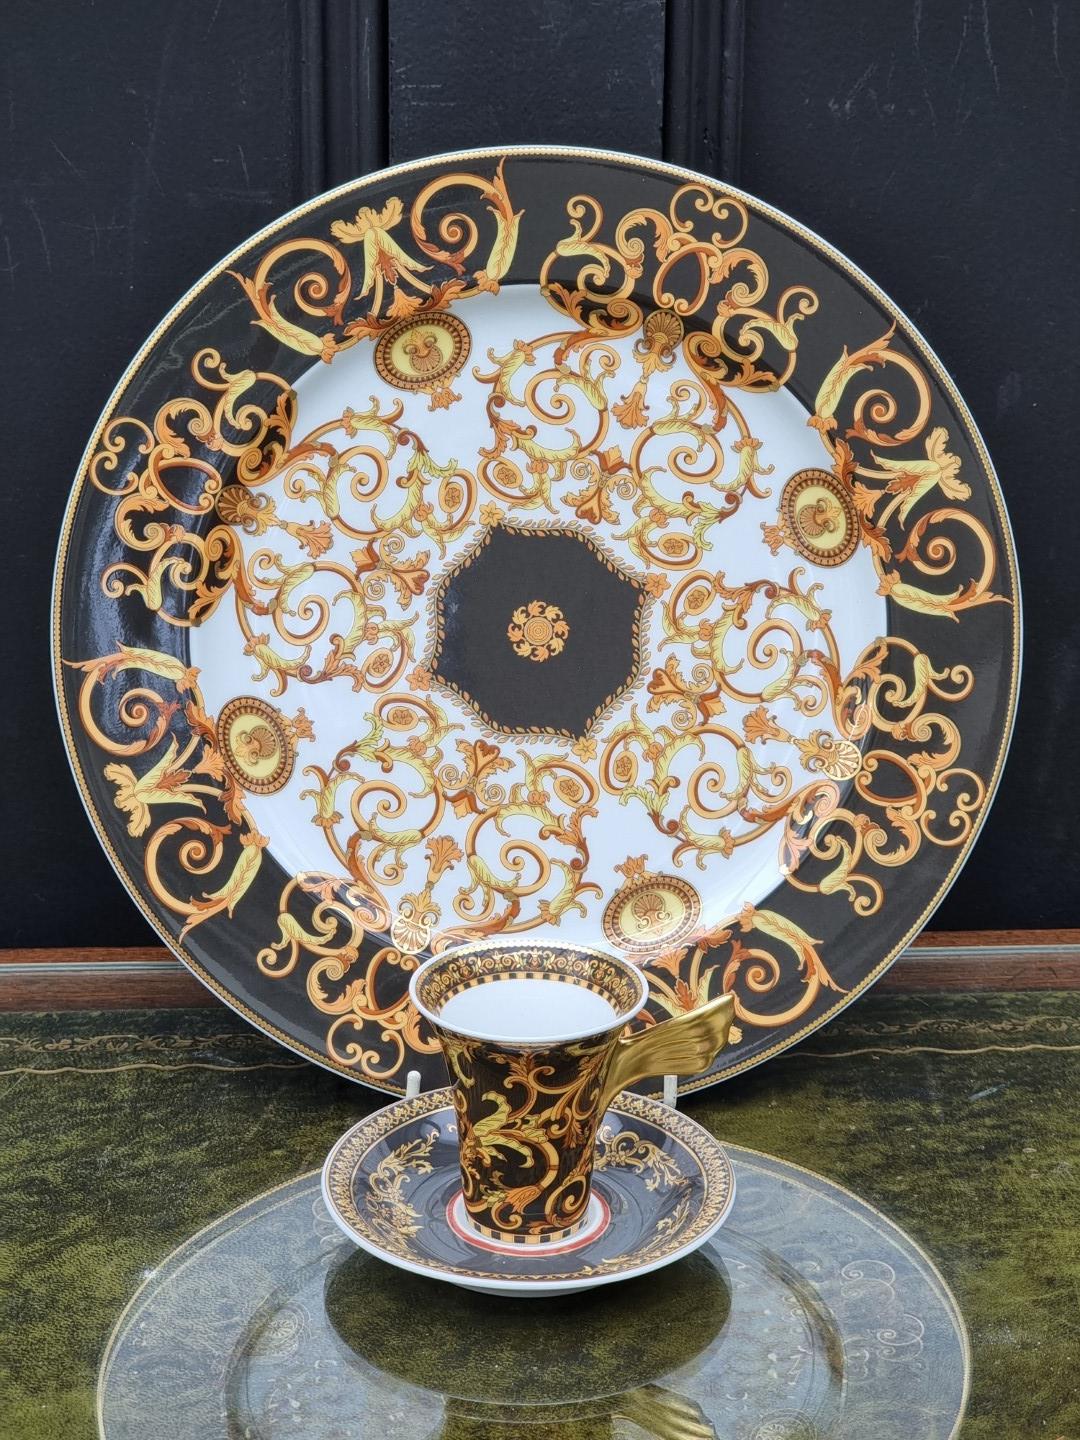 A Rosenthal Versace 'Barocco' pattern plate, cup and saucer, the plate 31cm diameter.